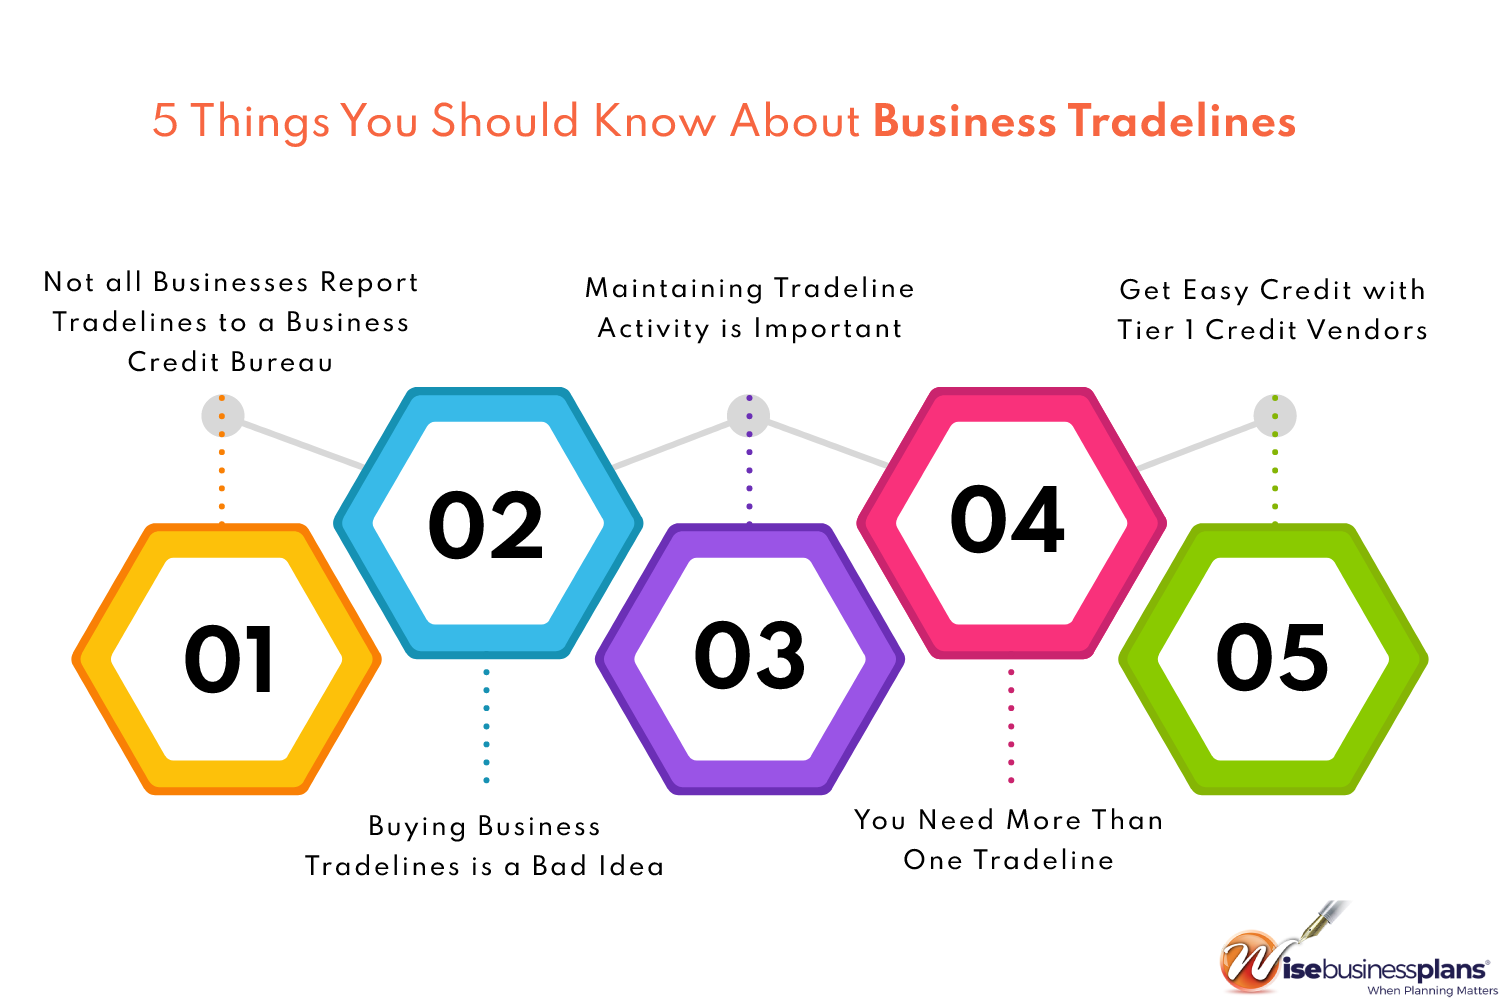 Things you Should Know About business Tradelines